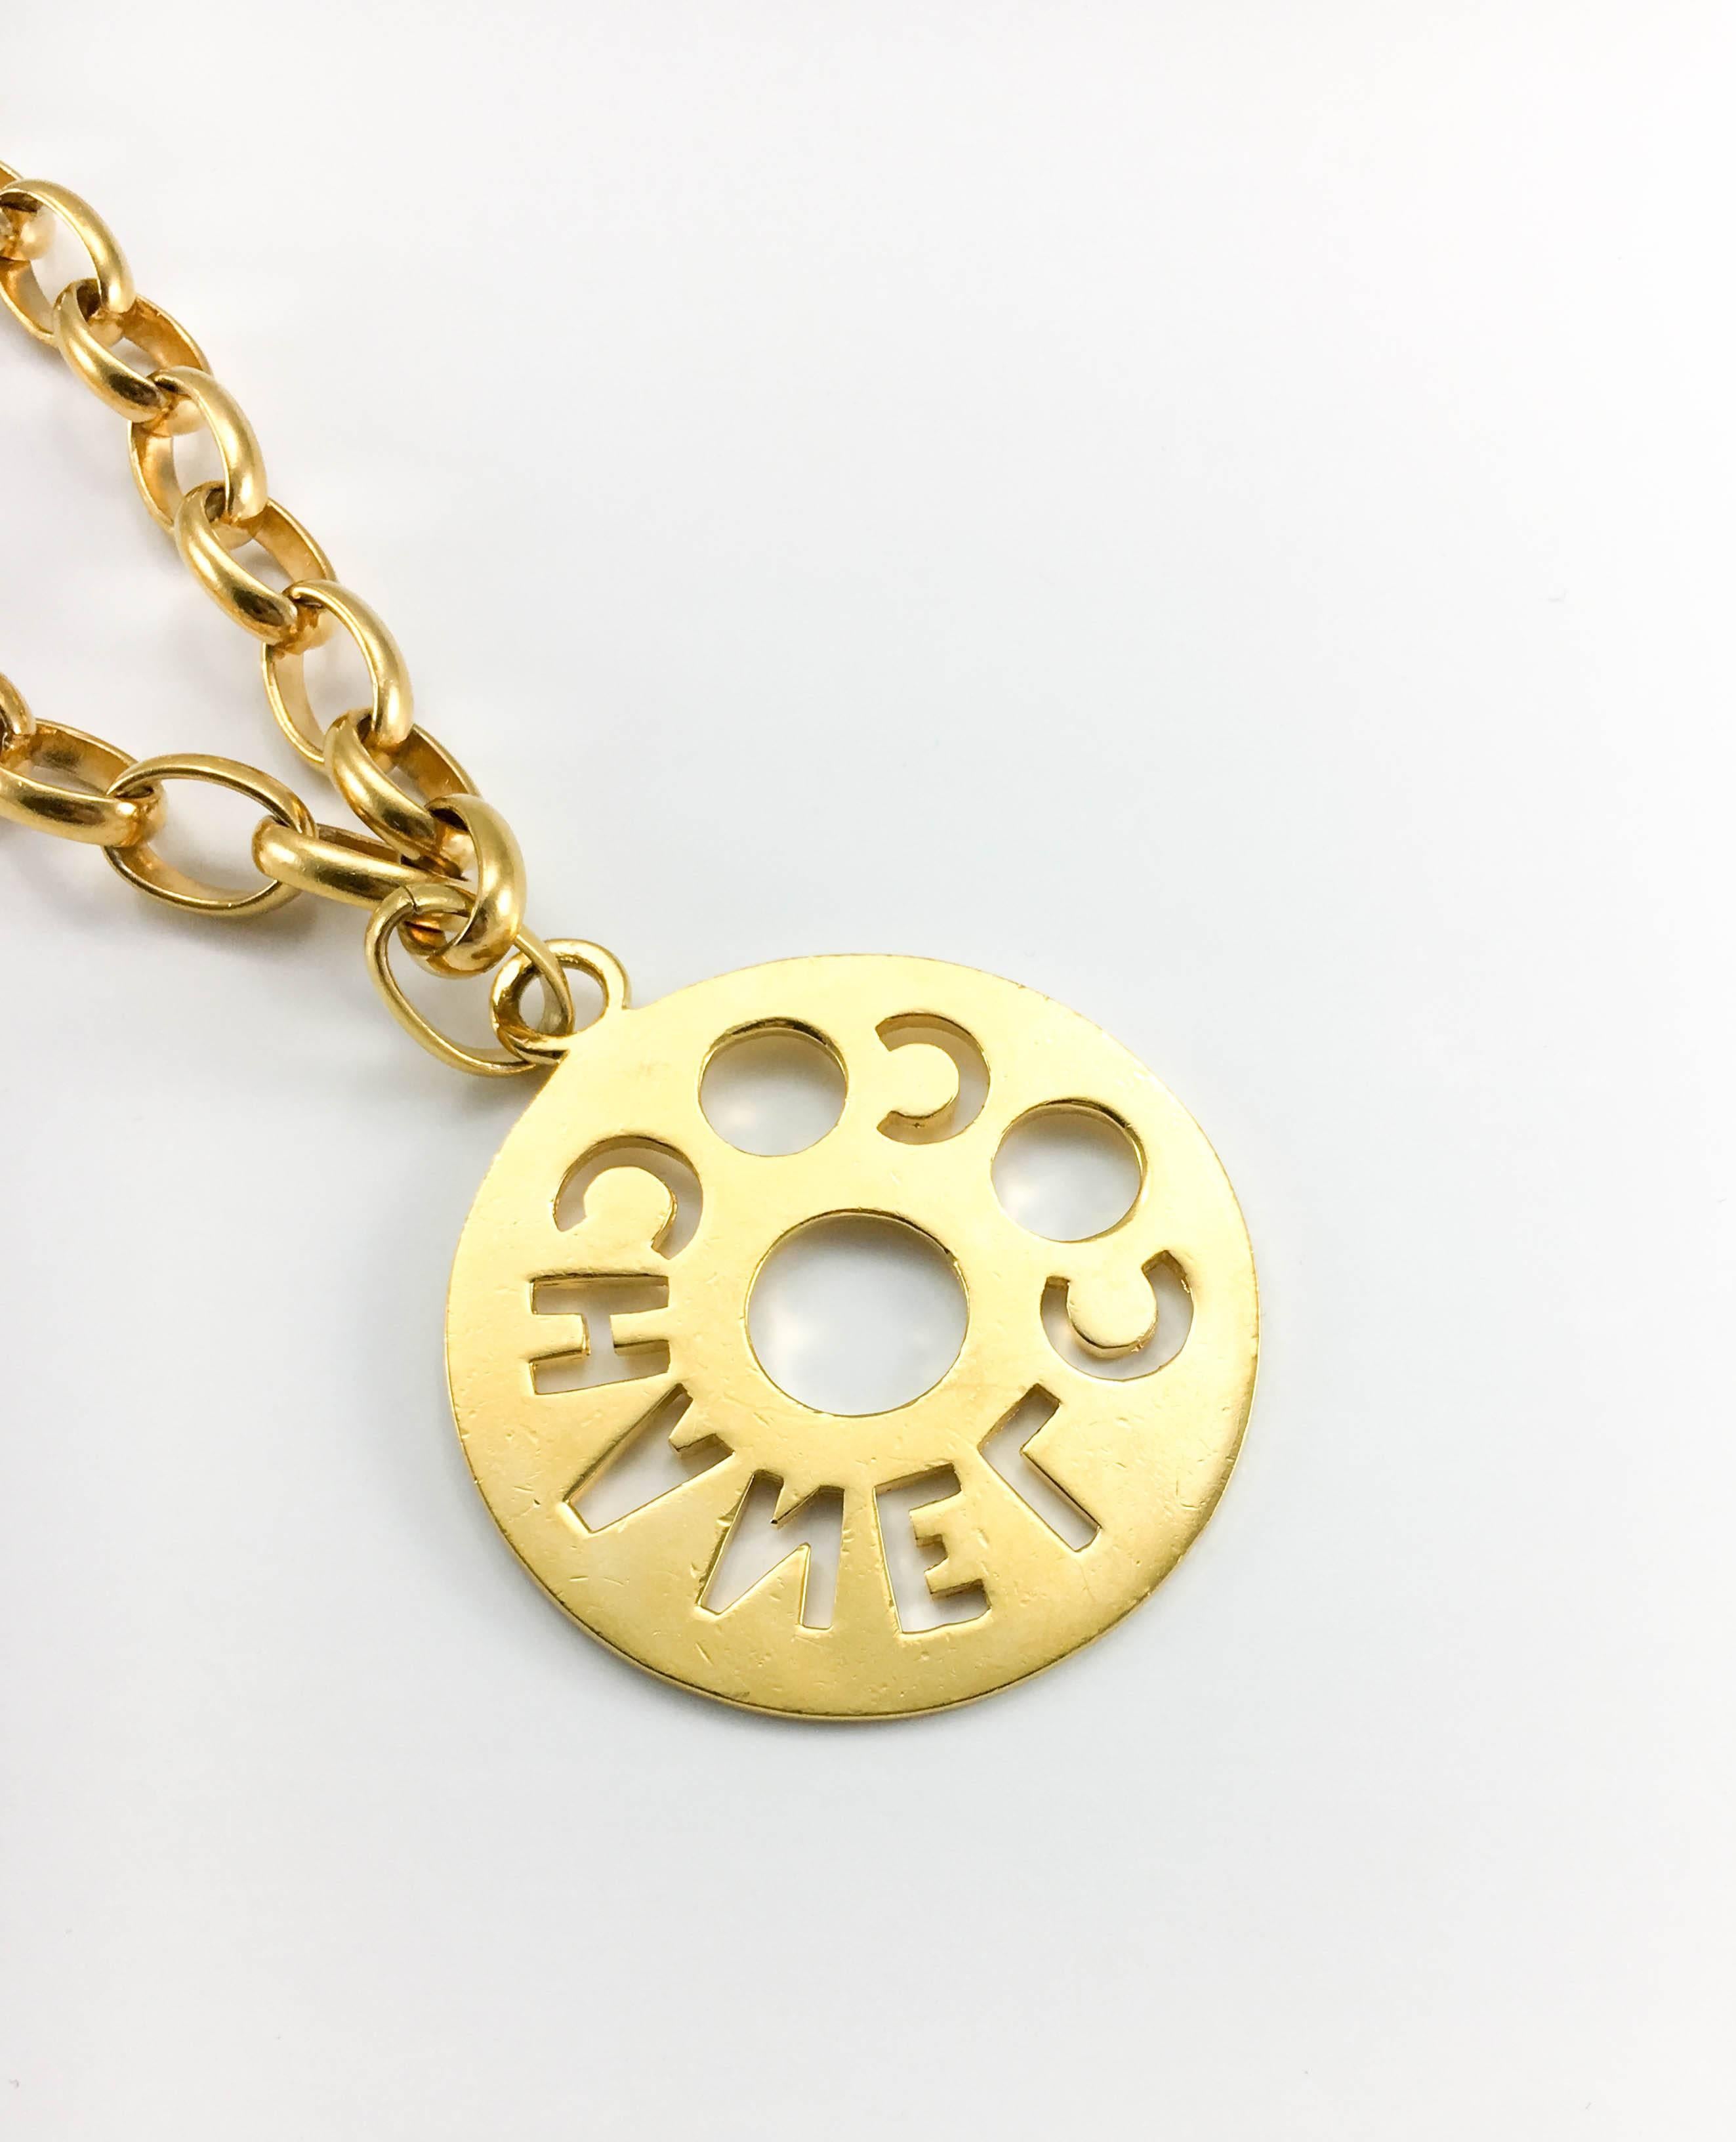 Chanel Chunky Gold-Tone 'Coco Chanel' Disk Pendant Chain Necklace - 1970's 4